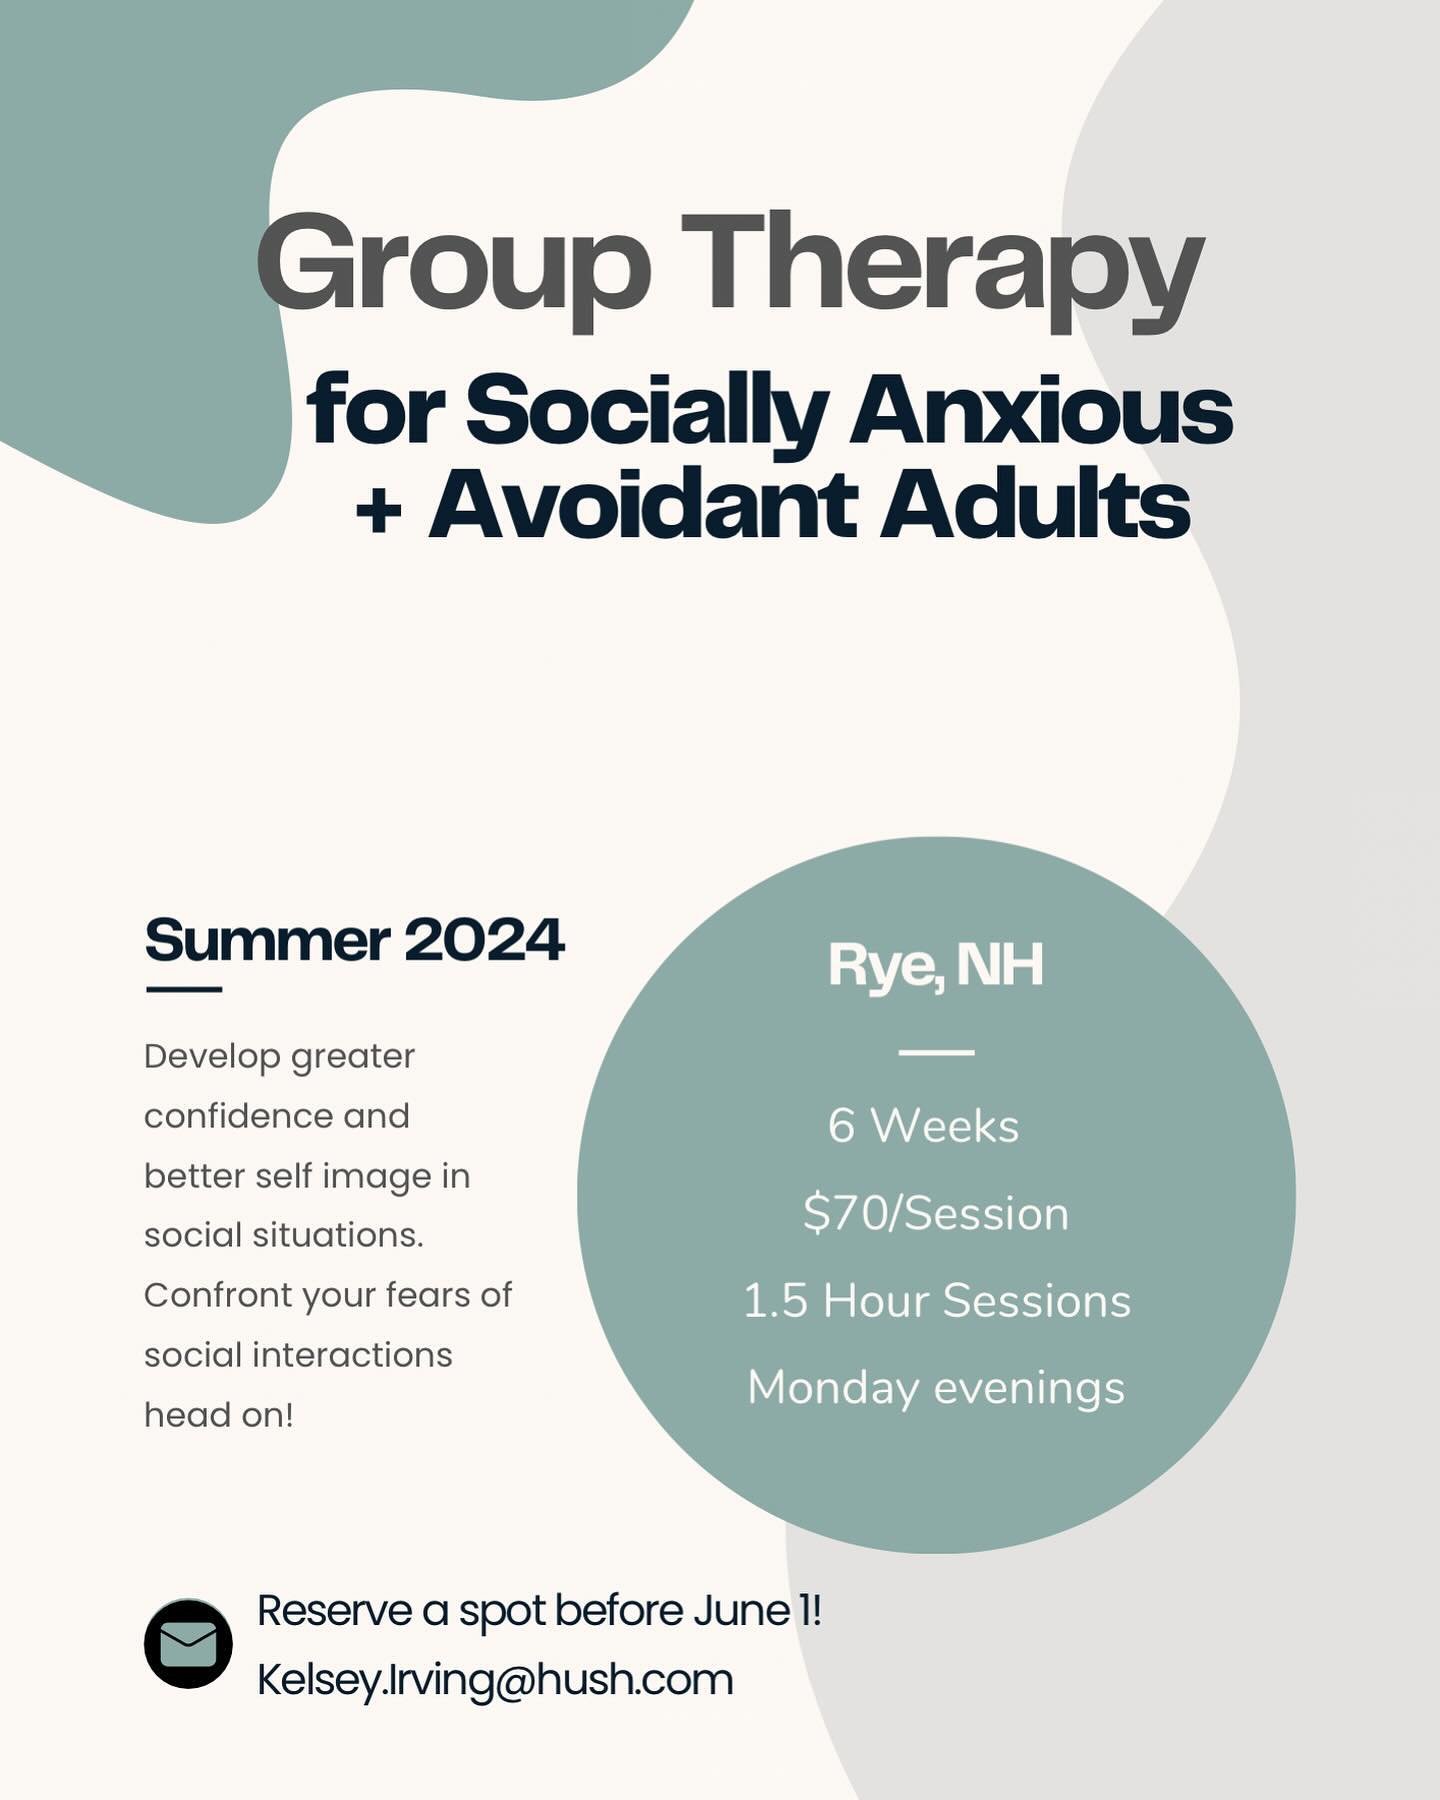 Social Anxiety Group: This Summer in Rye, NH! Weekly sessions (1.5 hrs) on weekday evenings. $70/session x 6 wks. Adults only. PM me for more info! 

Social anxiety affects more than 32 million Americans. Get support from others who have similar chal